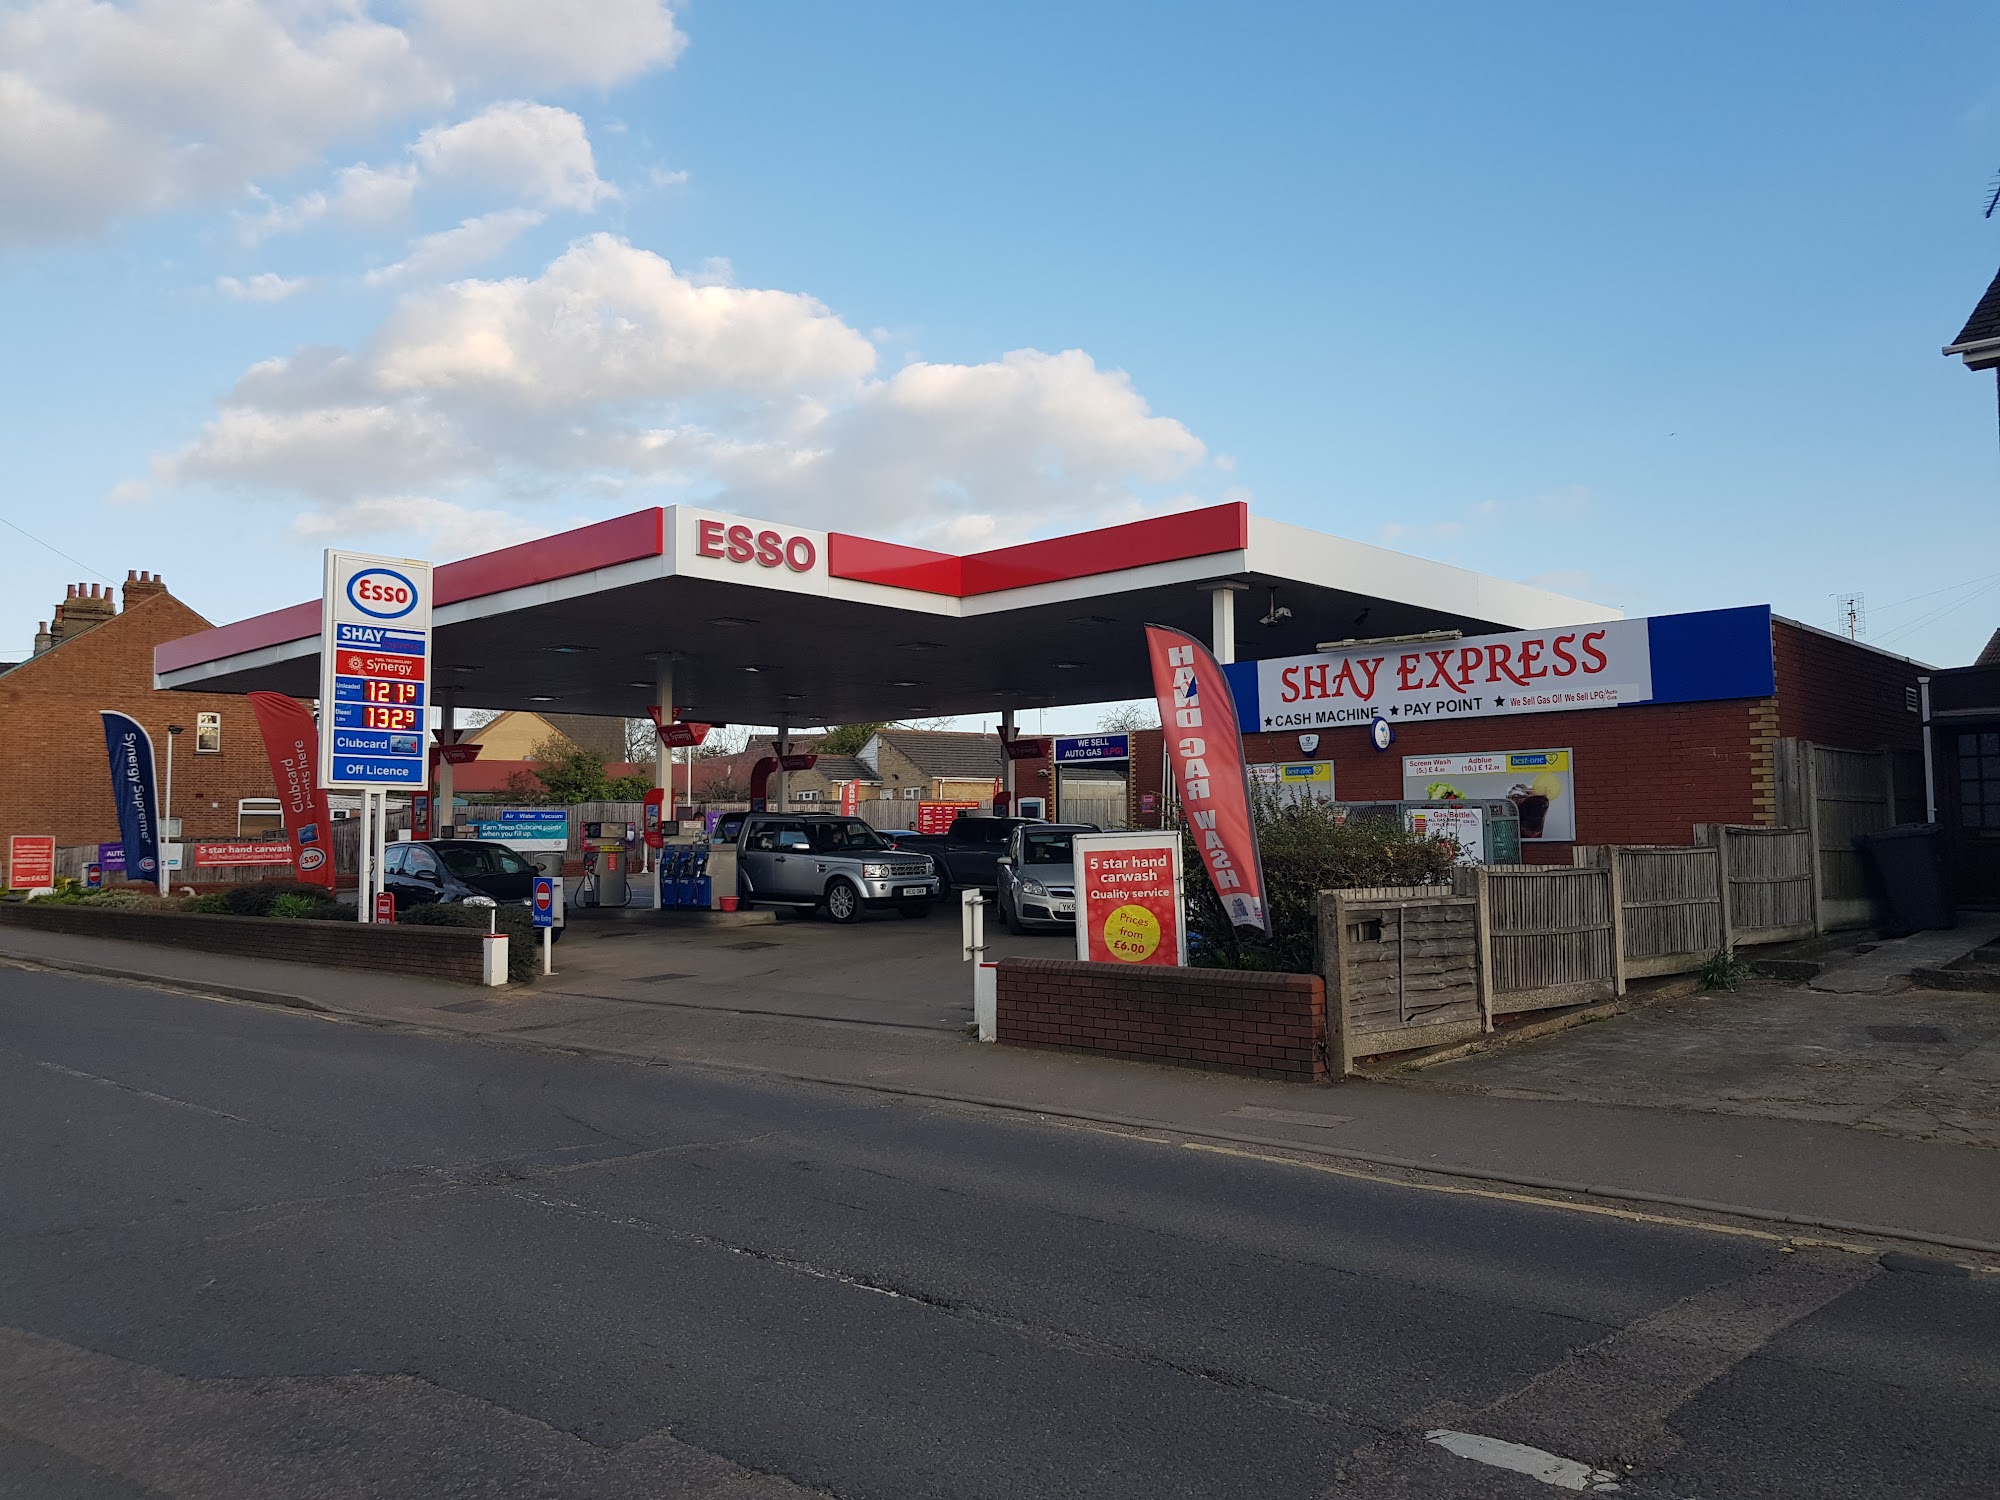 ESSO ST. NEOTS